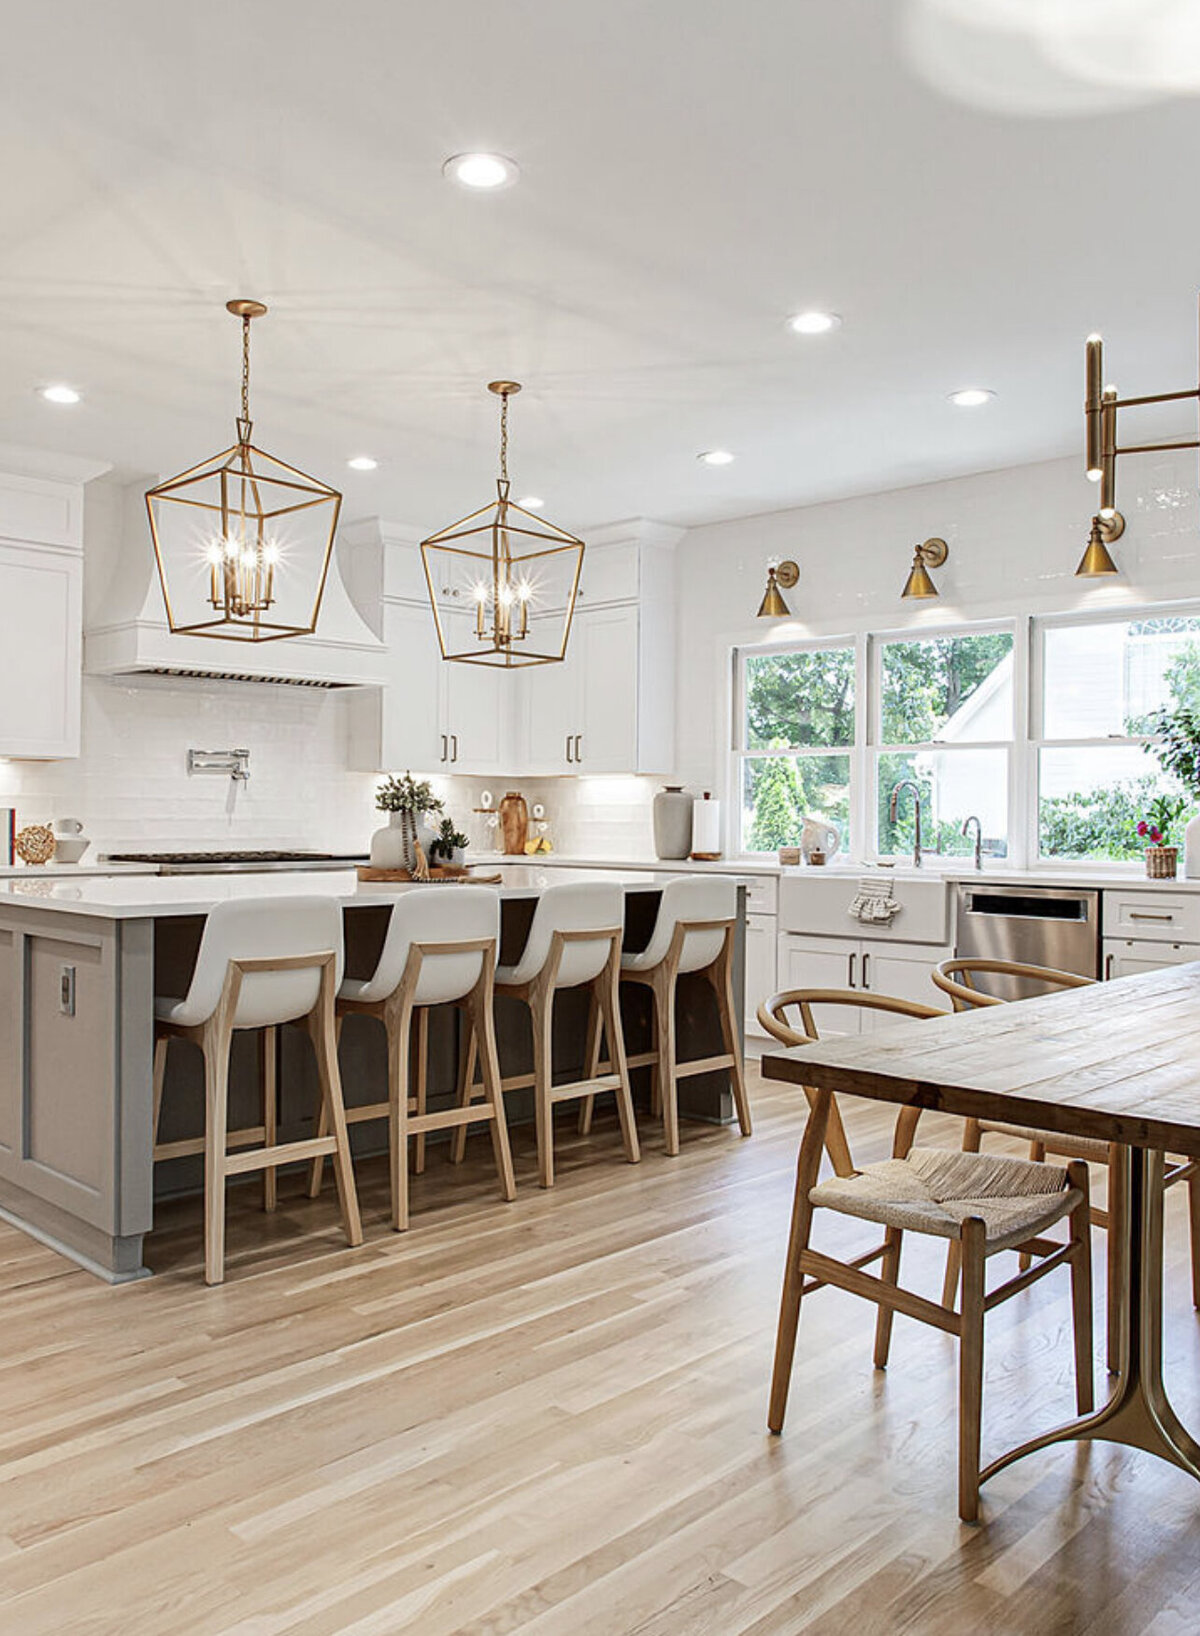 Bright, modern kitchen with white cabinets, gold light fixtures, a large island with bar stools, and a wooden dining table with chairs.